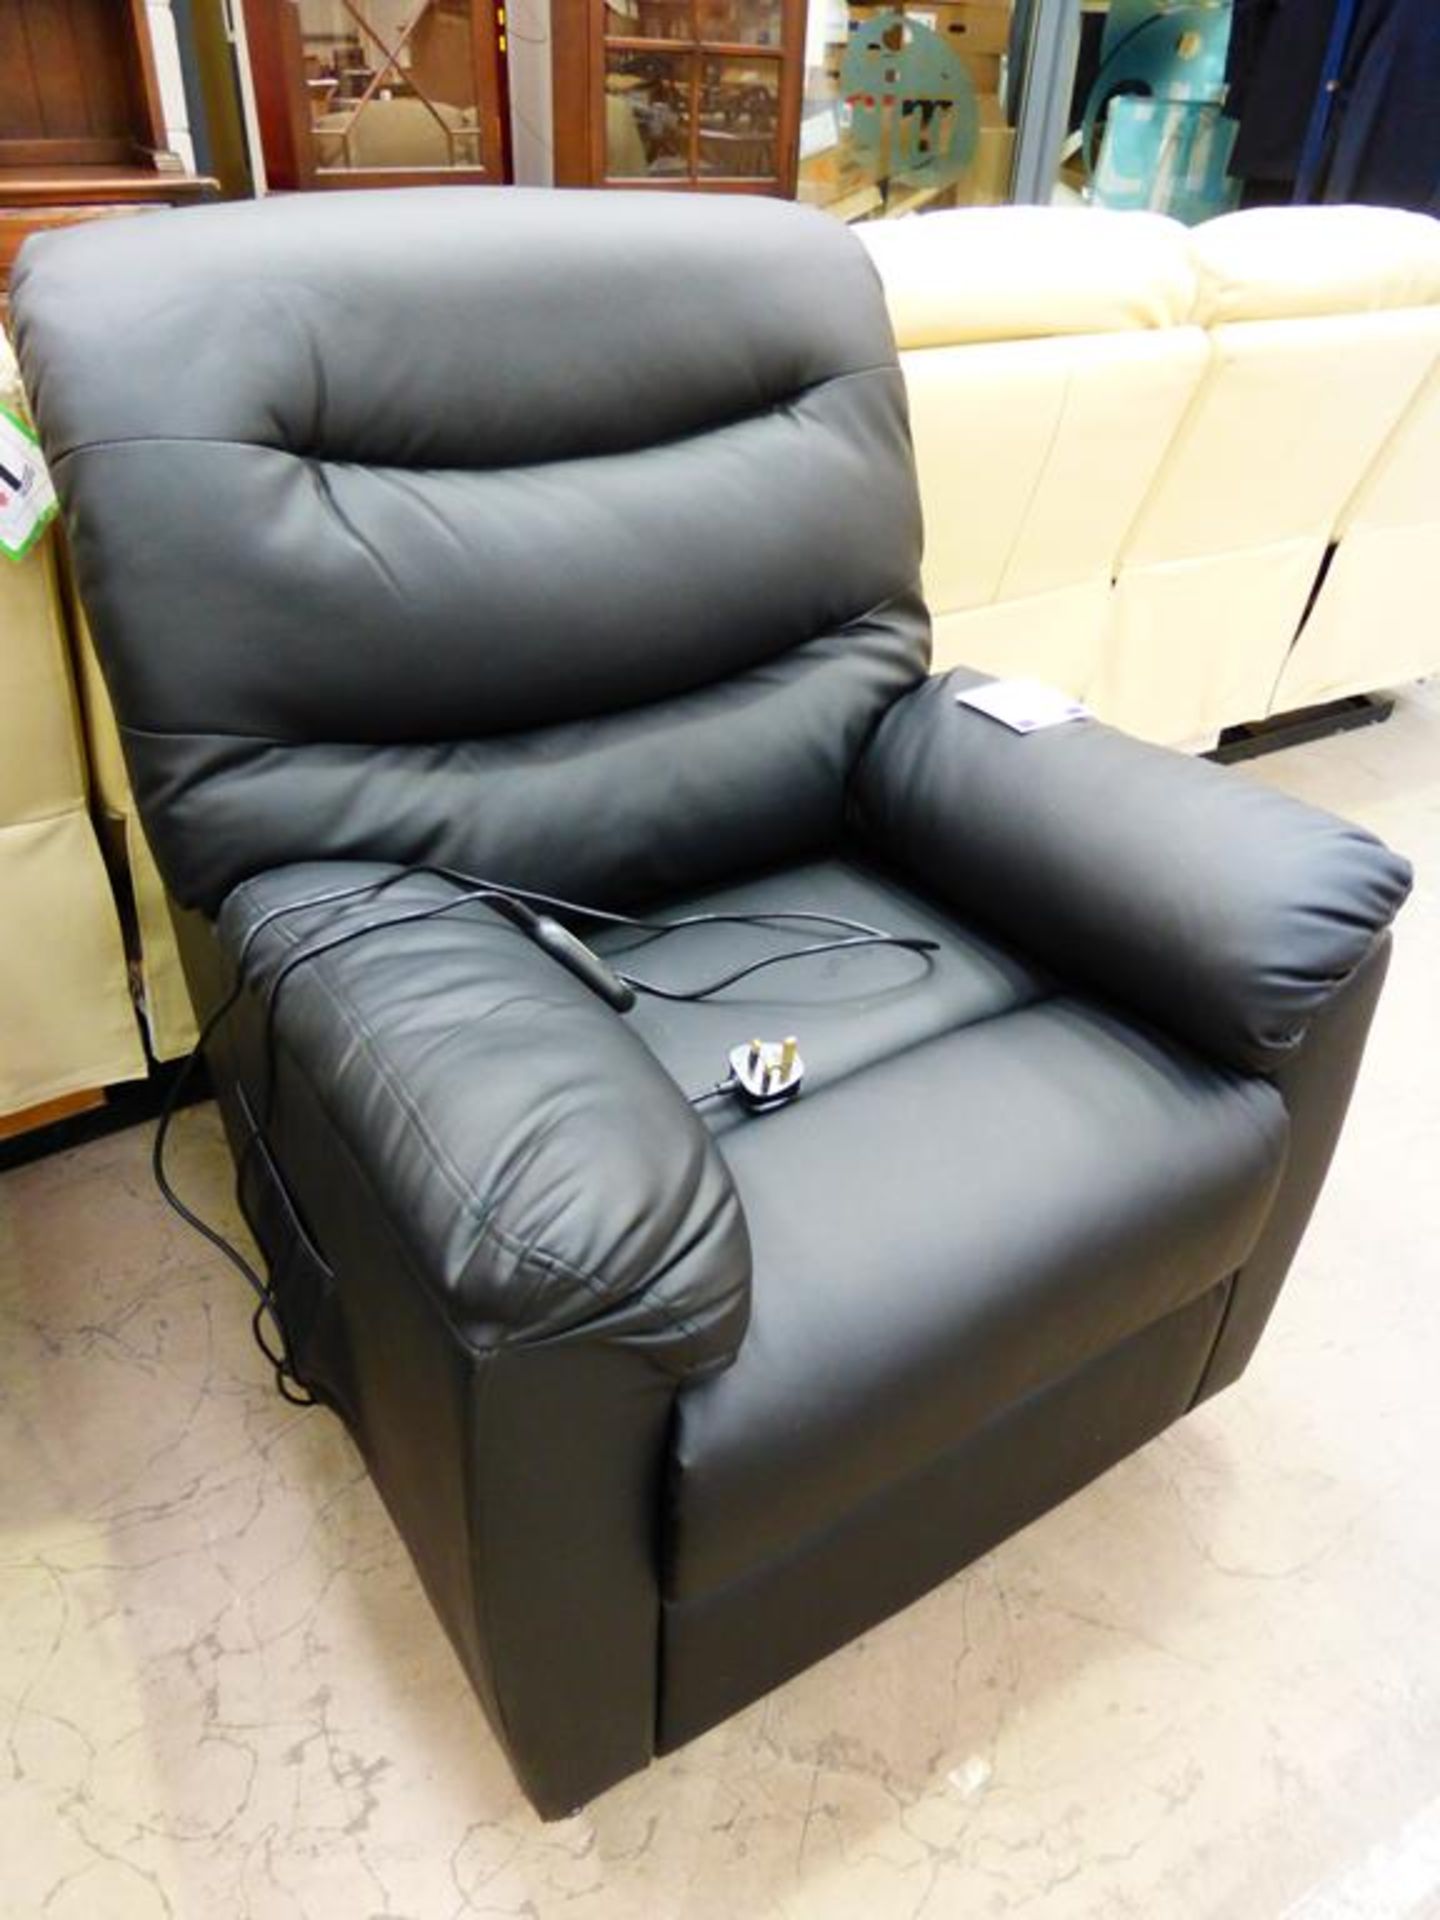 Birlea Regency Rise and Fall Recline Faux Leather Chair with a motorised tilt feature for easy